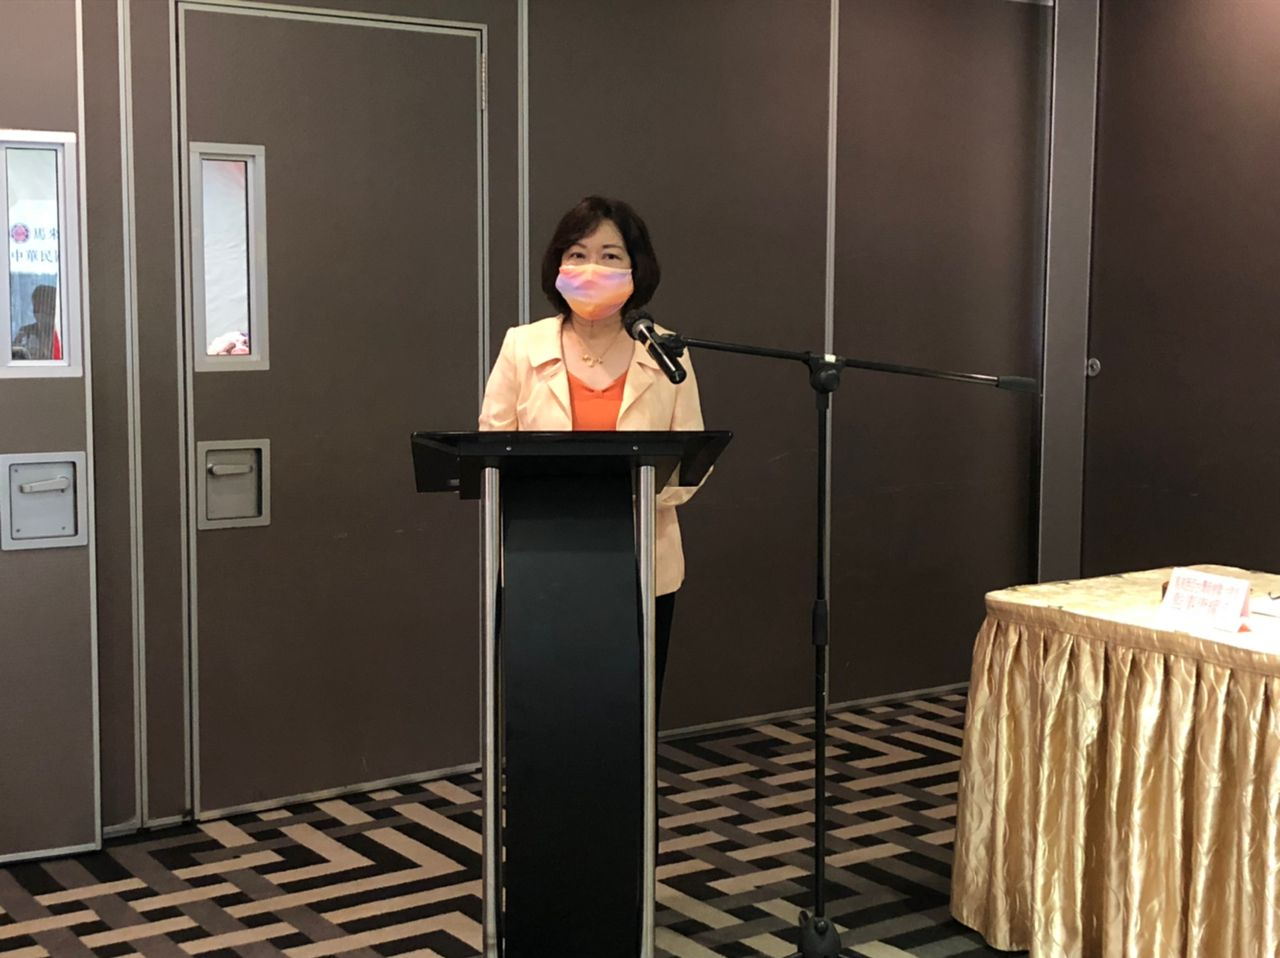 Representative Anne Hung delivers a speech at the 1st meeting of the 16th board of national committees of Taipei Investors´ Association in Malaysia.